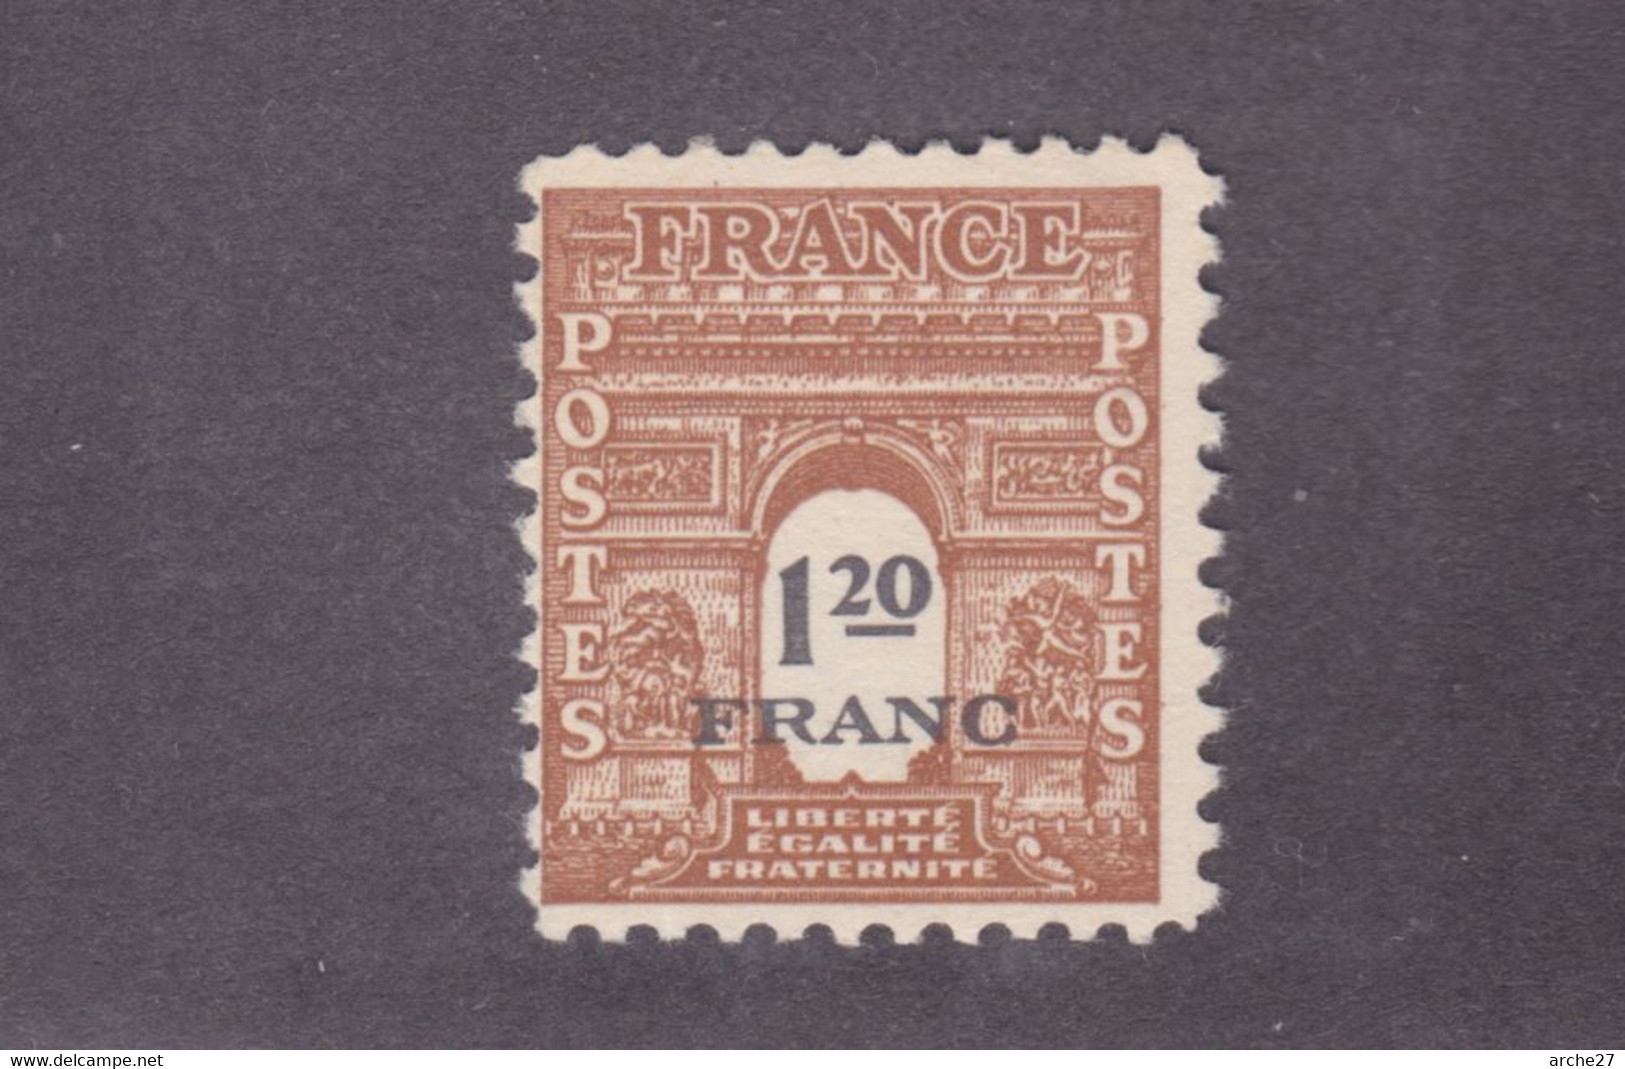 TIMBRE FRANCE N° 707 NEUF ** - Nuovi